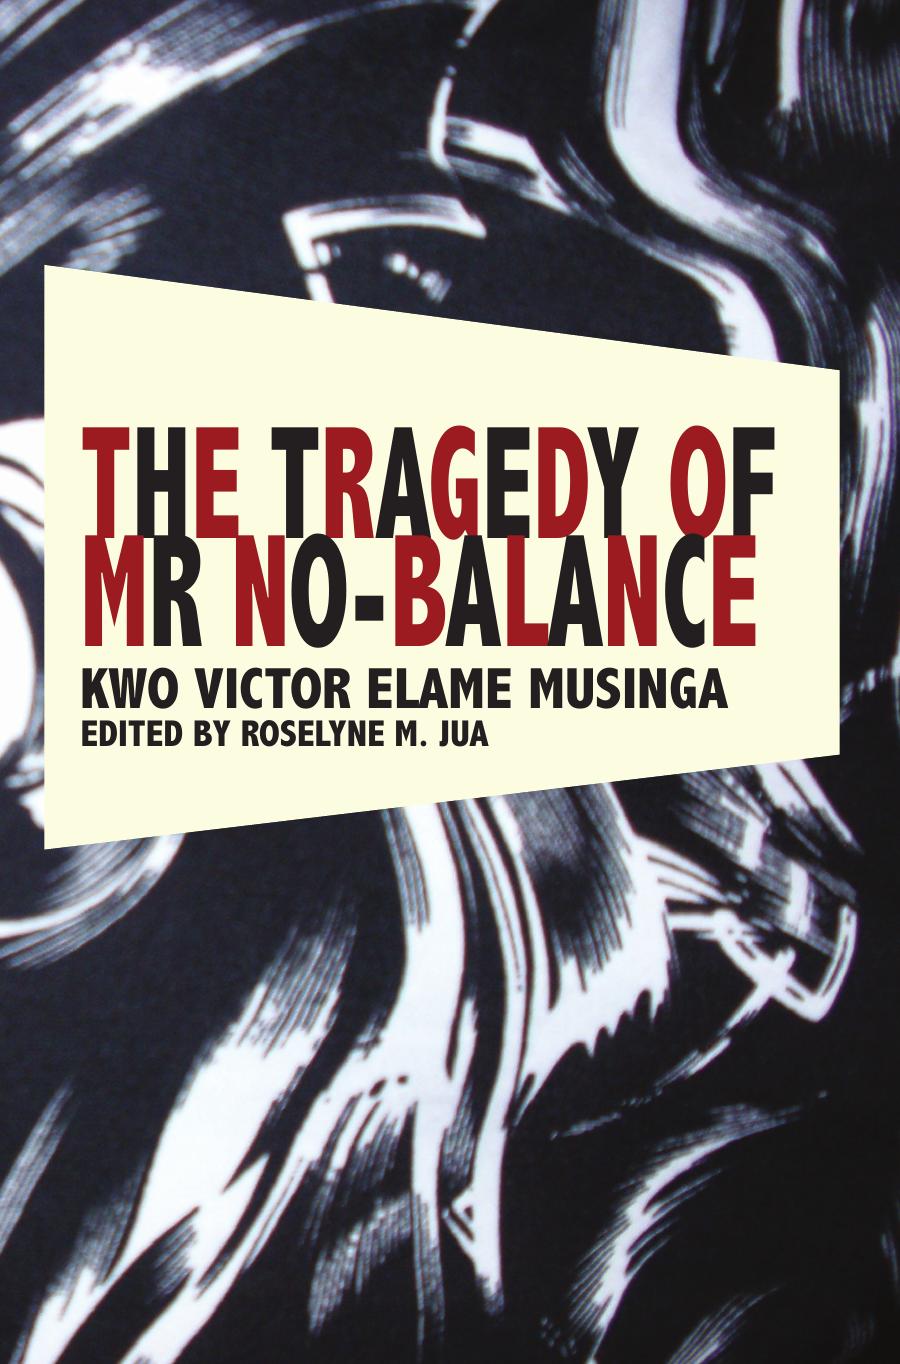 The Tragedy of Mr No Balance by Kwo Victor Elame Musinga